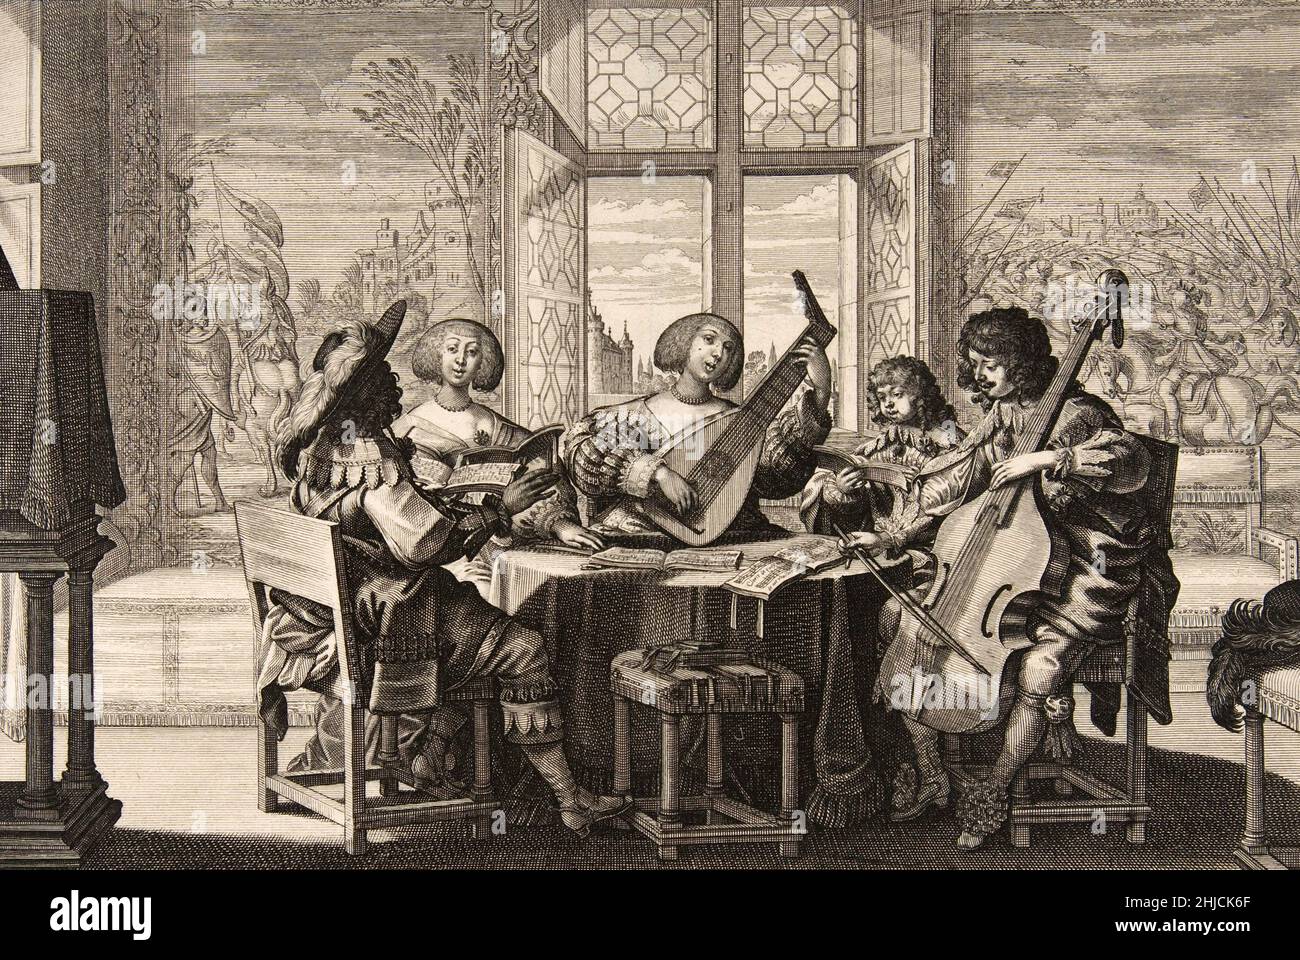 Hearing, from the series The Five Senses by French artist Abraham Bosse (1602/04-1676), published 1633-38. Stock Photo